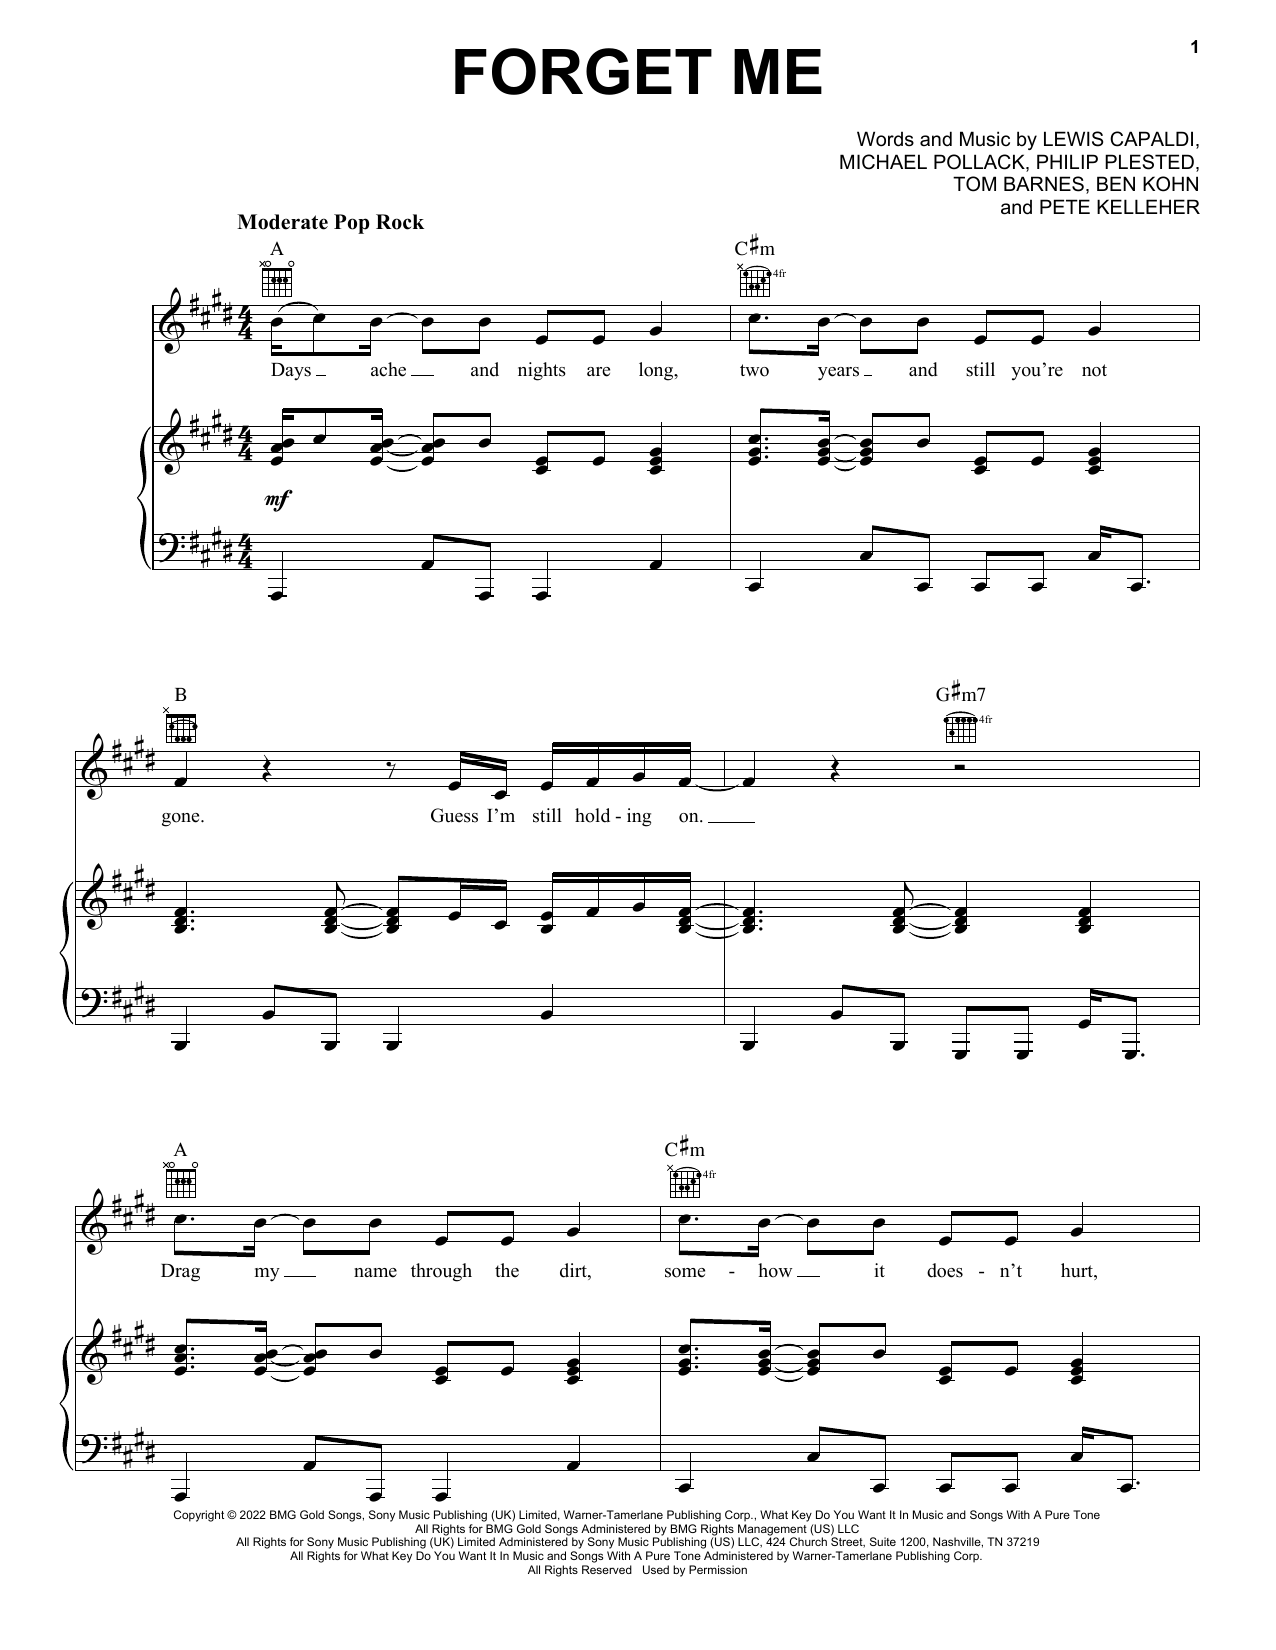 Lewis Capaldi Forget Me sheet music notes and chords - Download Printable PDF and start playing in minutes.